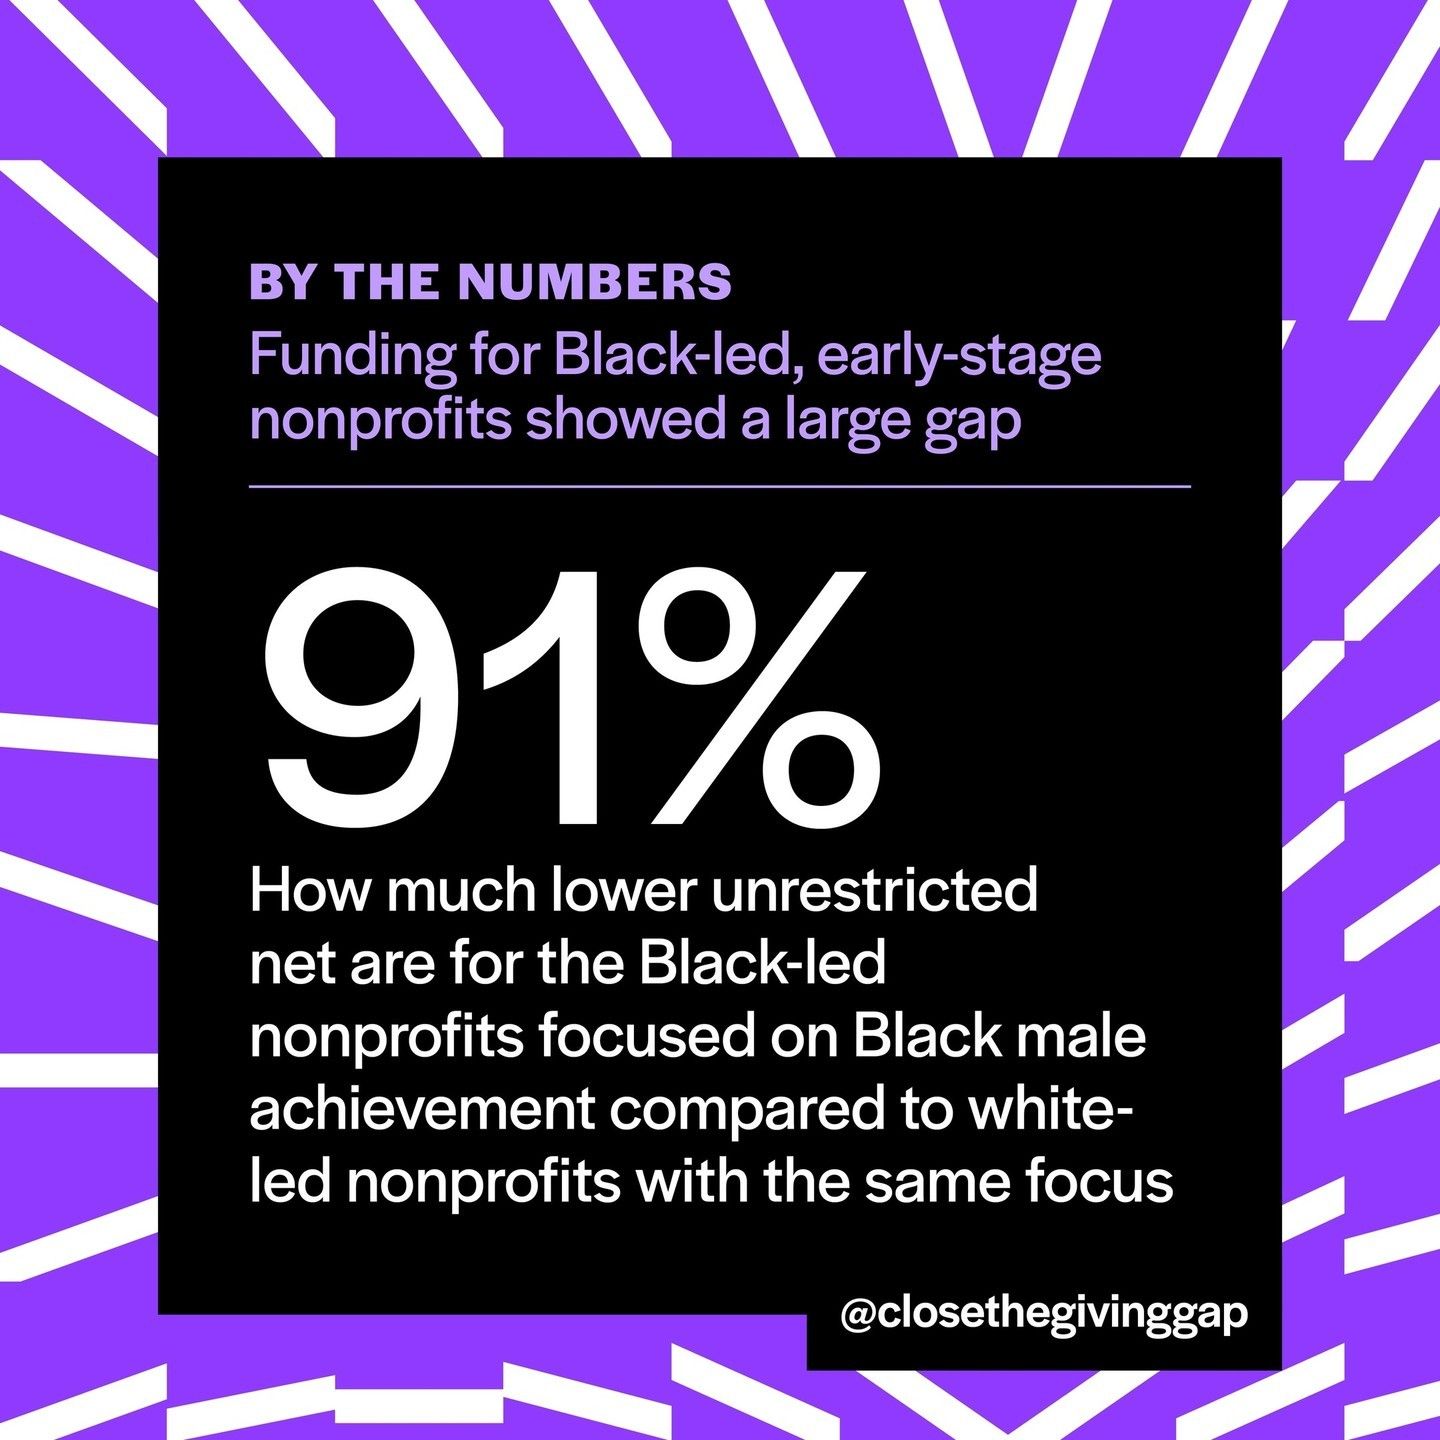 91% - That's how much lower unrestricted net are for the Black-led nonprofits focused on Black male achievement compared to white-led nonprofits with the same focus.